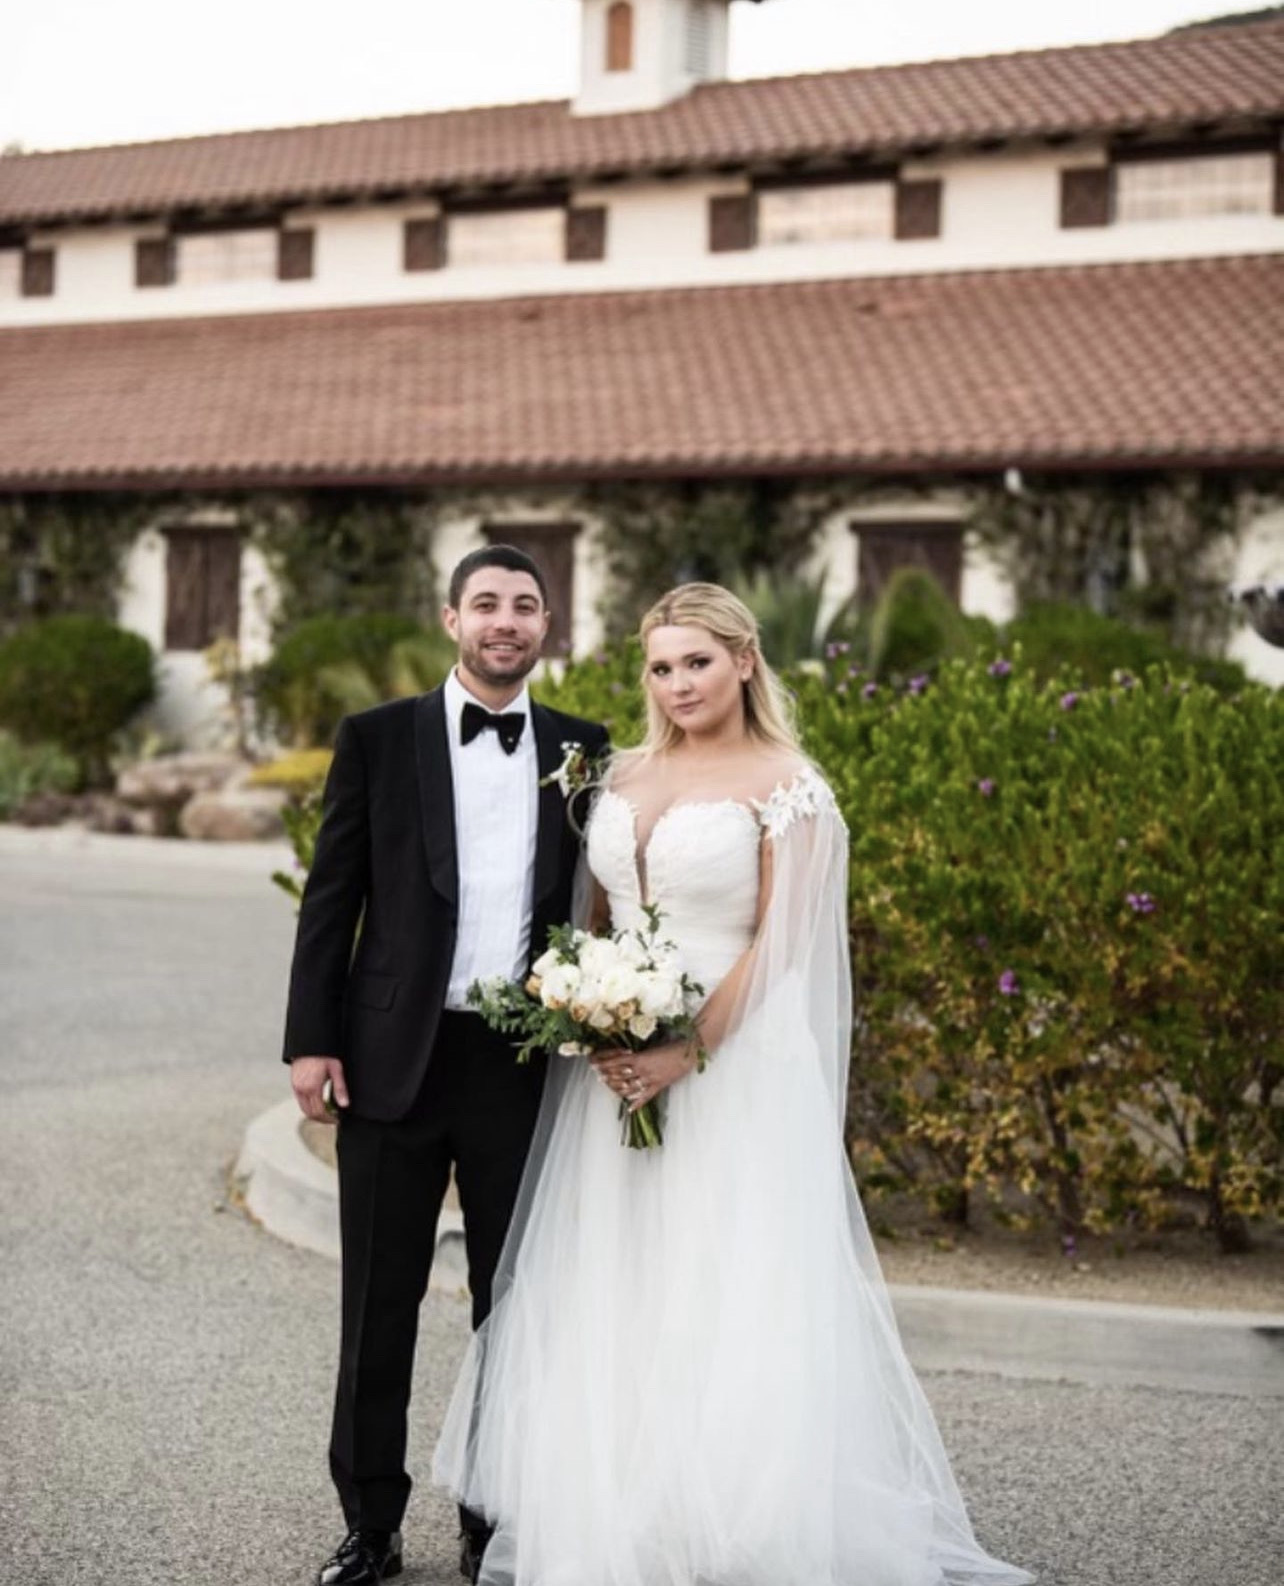 Abigail Breslin shared wedding pictures on social media after getting married to her husband, Ira Kunyansky.